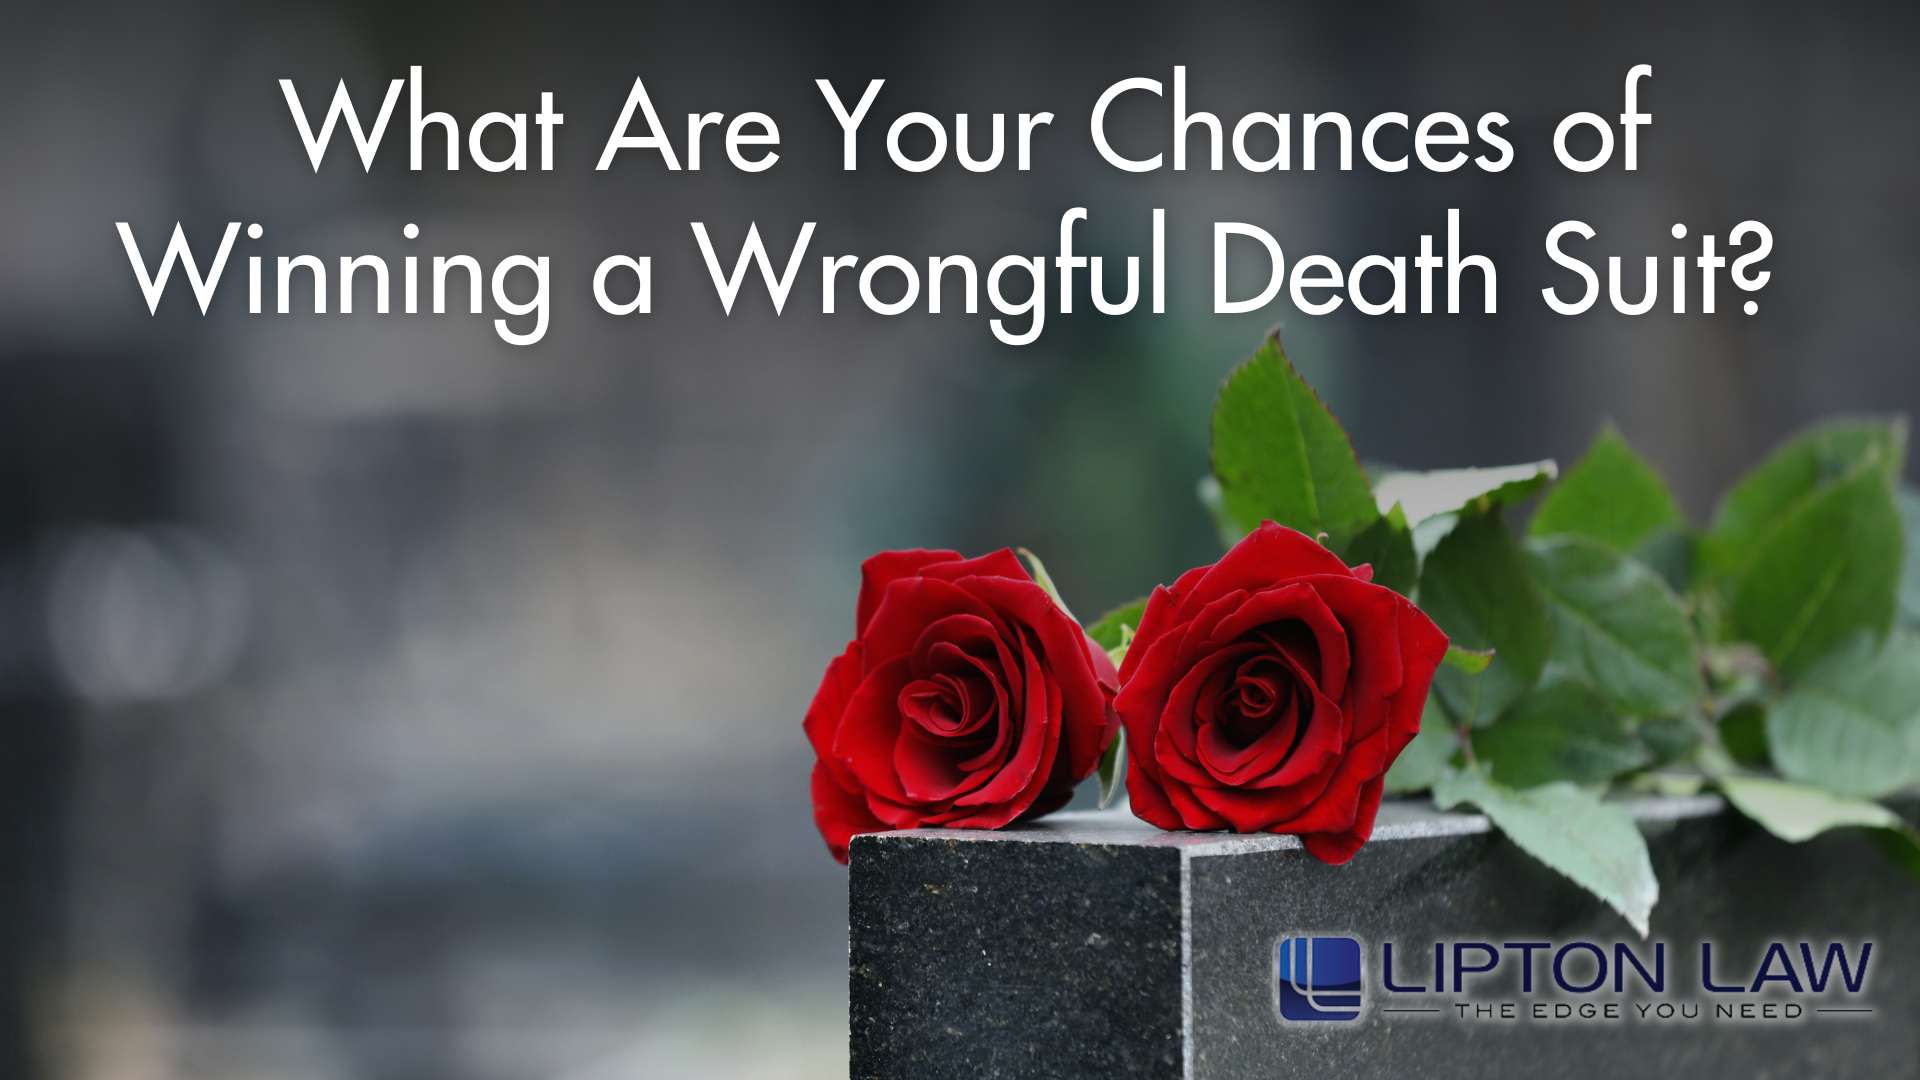 Chances of Winning a Wrongful Death Suit